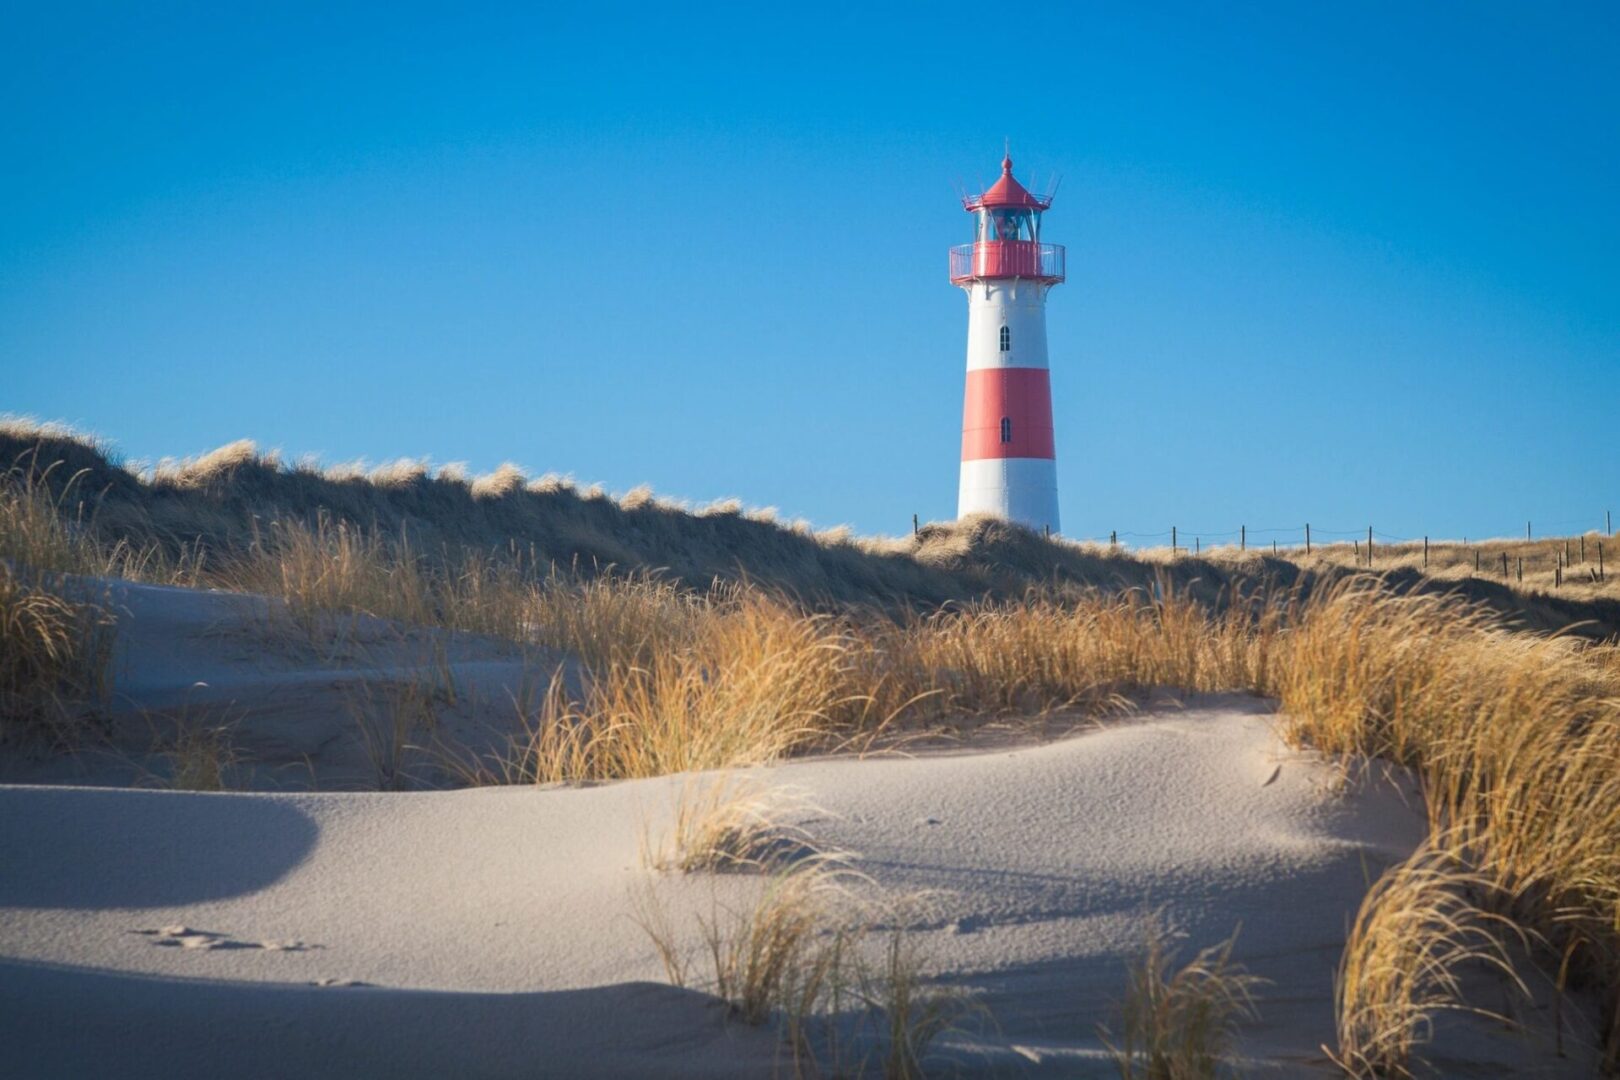 A lighthouse on the beach with sand and grass